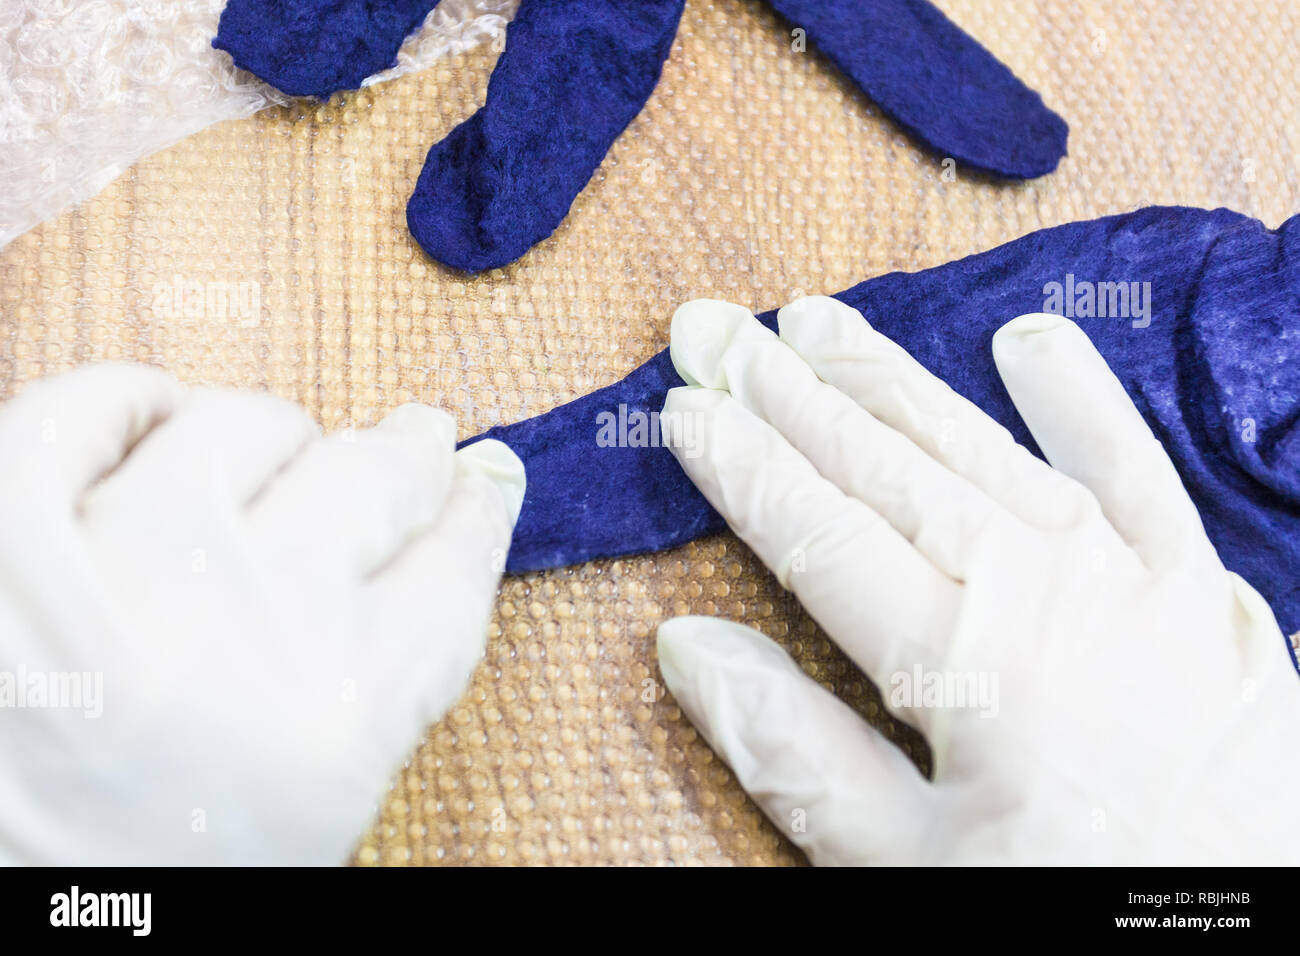 workshop of hand making a fleece gloves from blue Merino sheep wool using wet felting process - craftsman condensing fingers of the felted glove Stock Photo